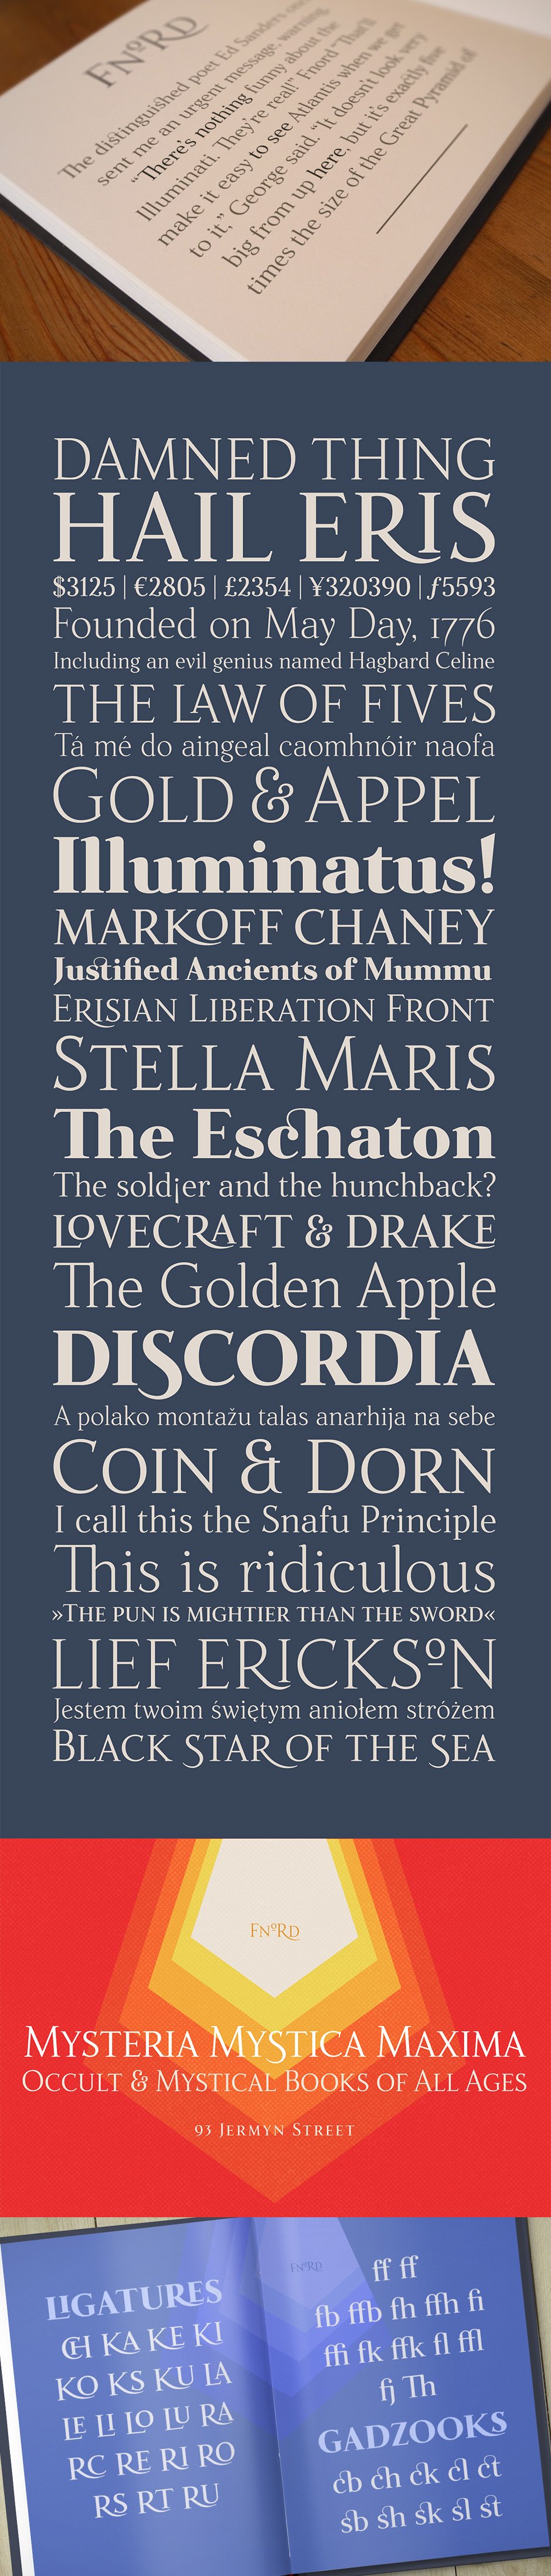 Fnord Roman Serif Font Collection